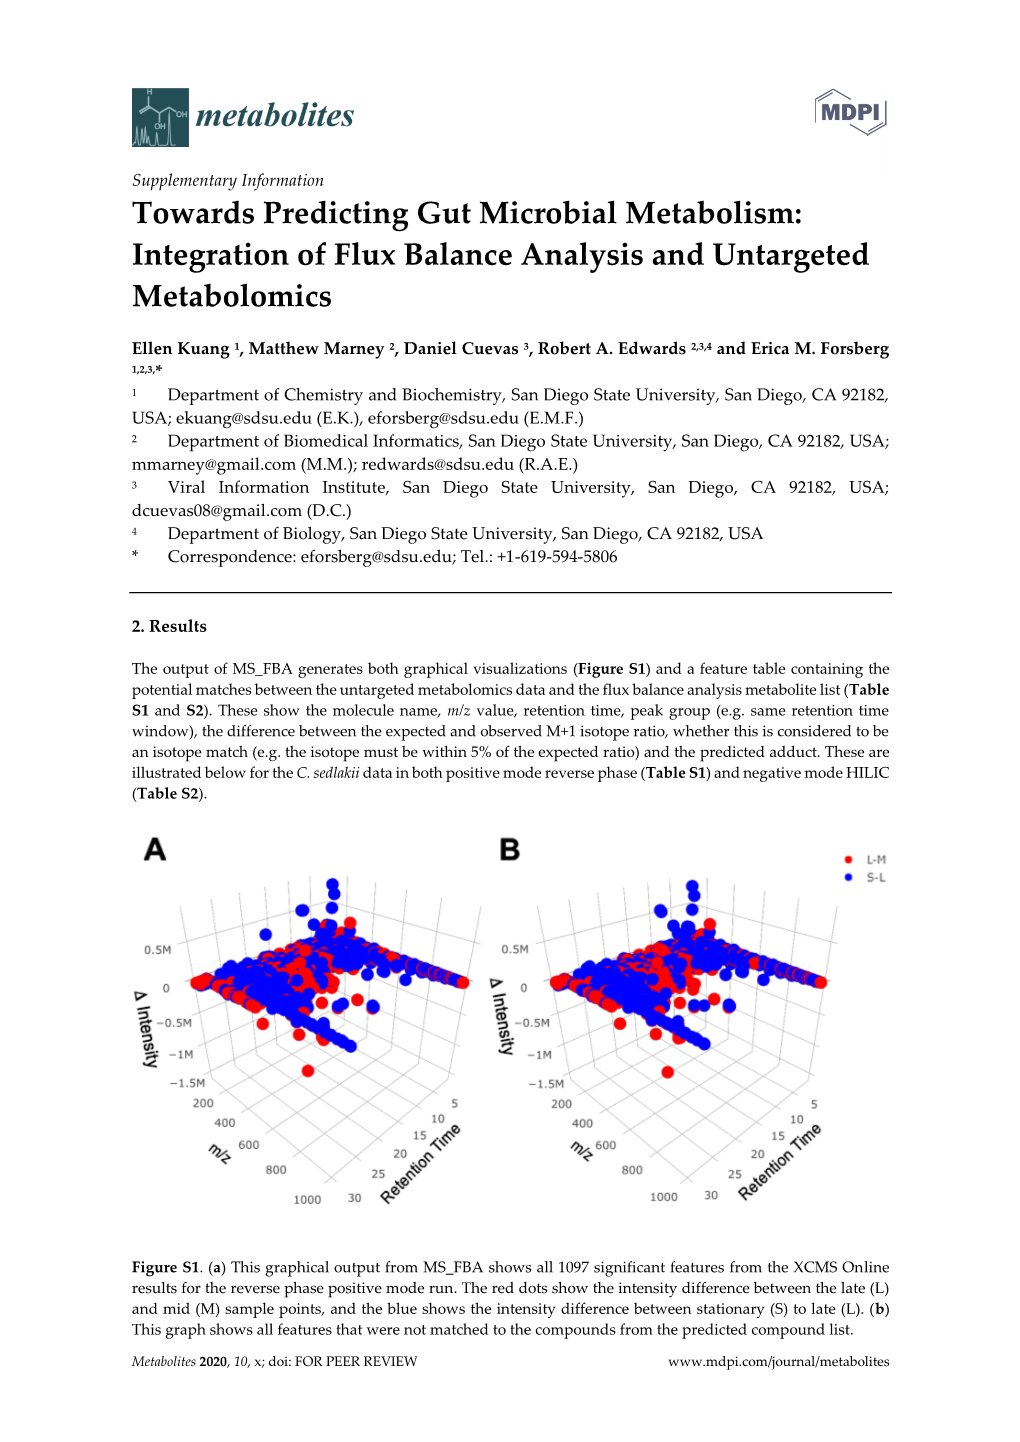 Integration of Flux Balance Analysis and Untargeted Metabolomics